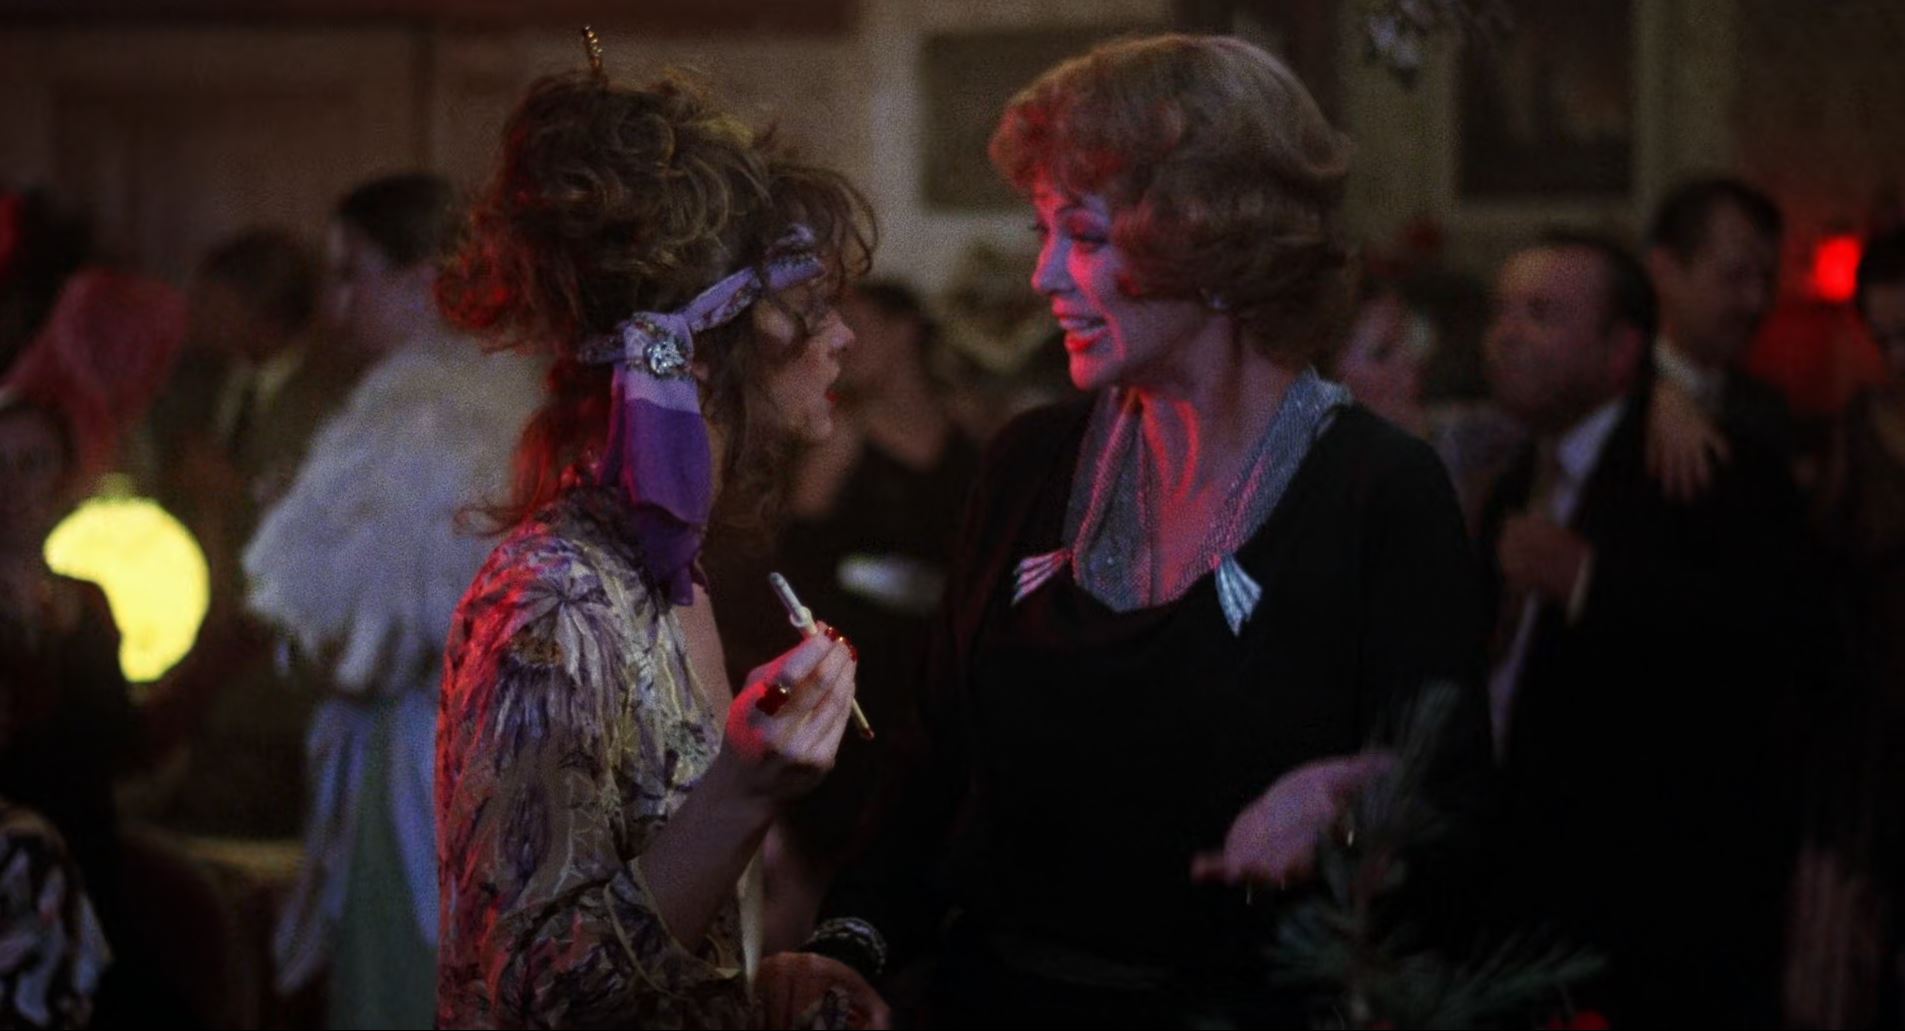 The Lady in Red (1979) Screenshot 4 